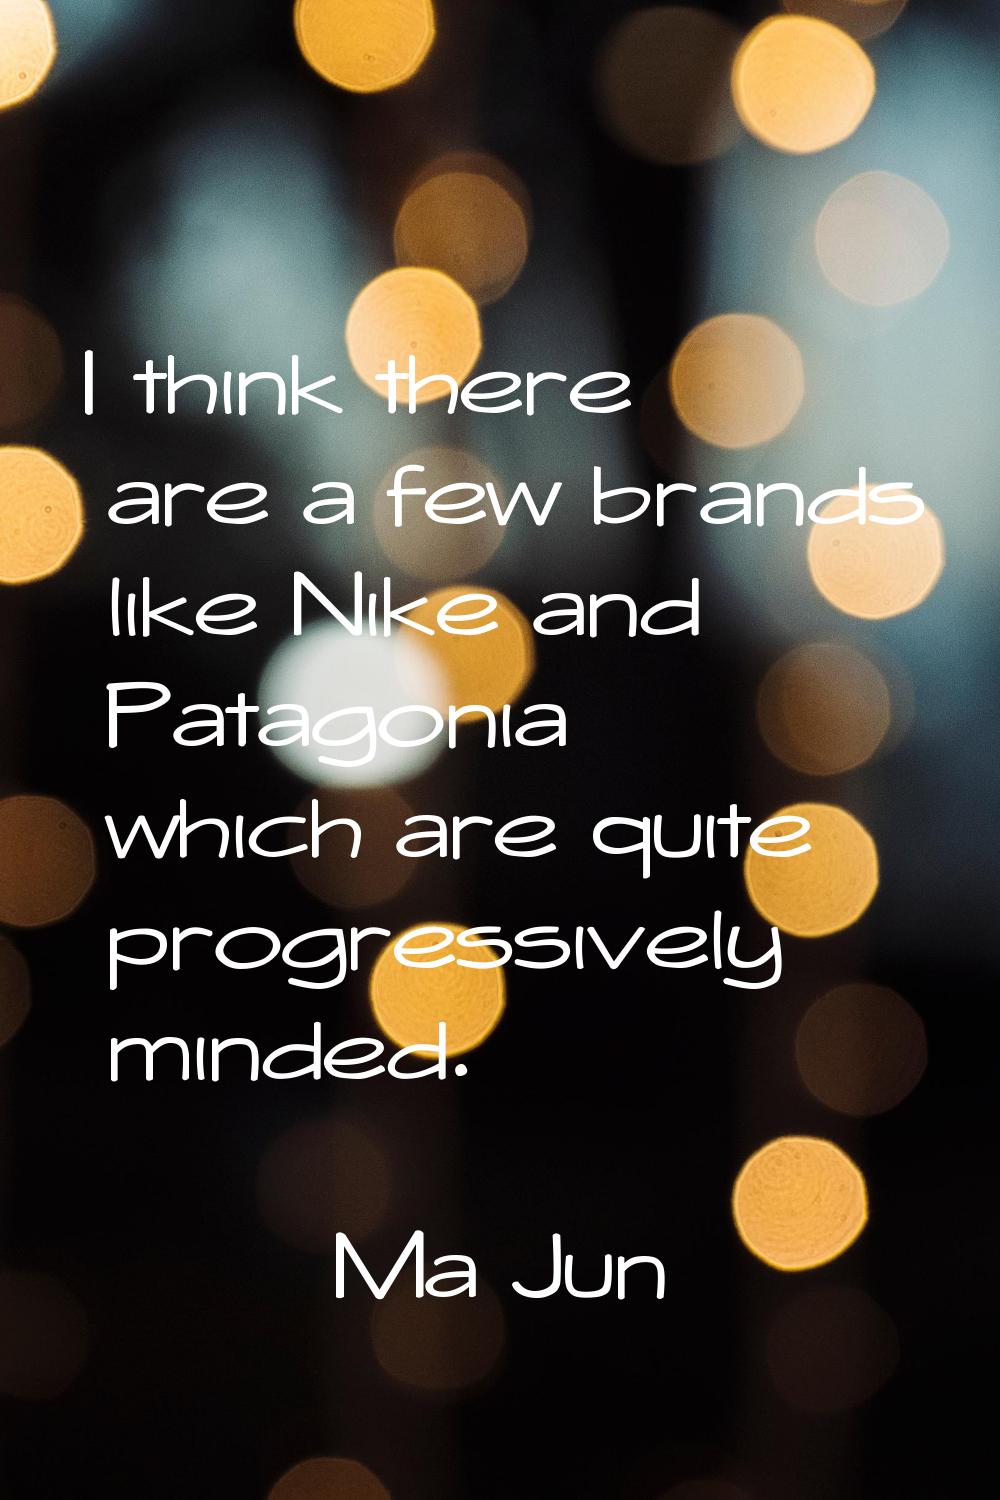 I think there are a few brands like Nike and Patagonia which are quite progressively minded.